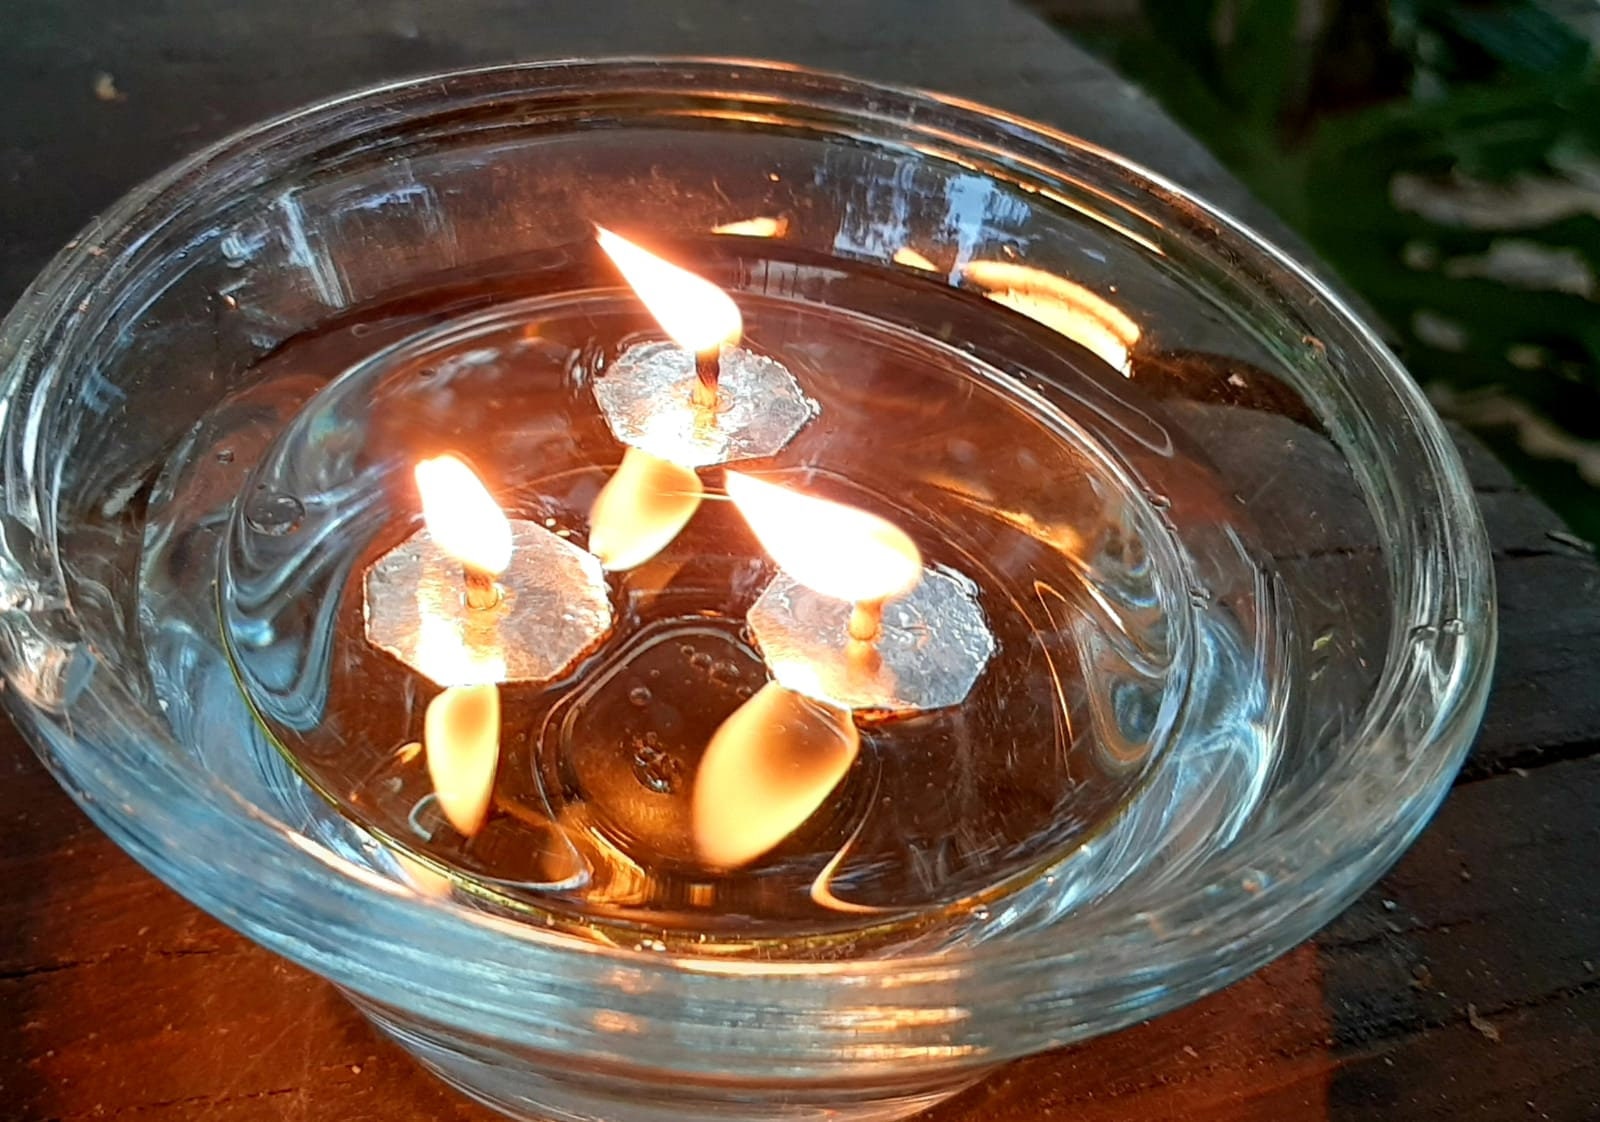 Large Round & Round Floating Candles, Floating Candle Wicks Oil Candles, Deepavali, Diwali, Light Festival, Hanukah, Sabbath Floating Oil Candle